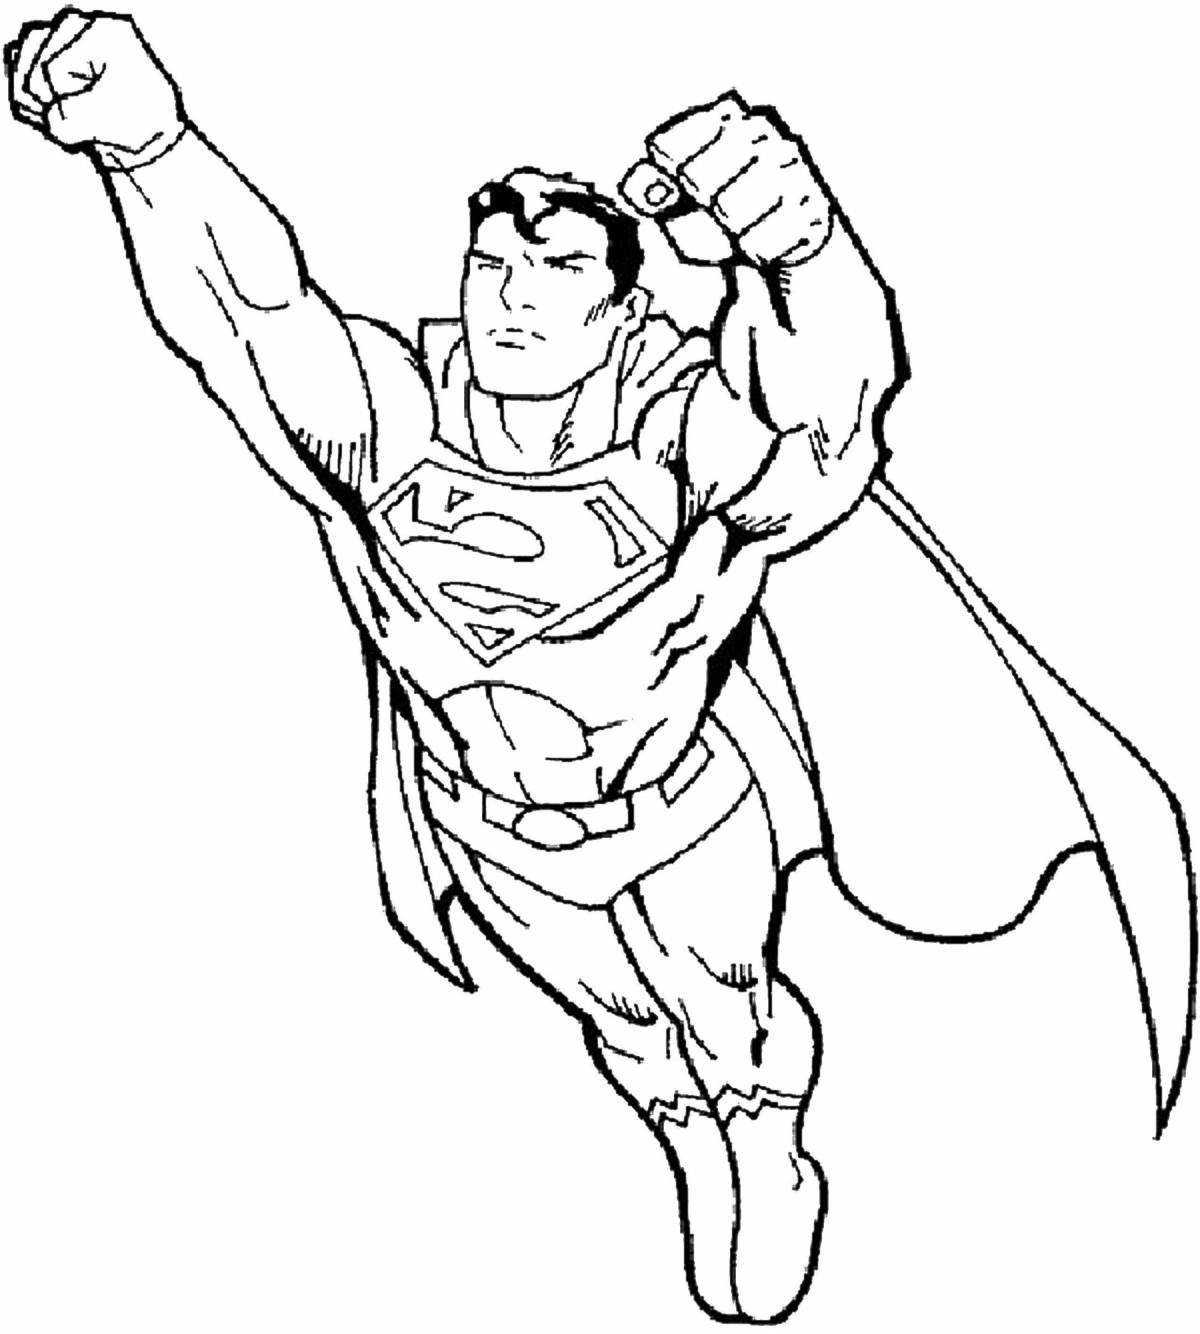 Amazing superhero coloring pages for 6-7 year olds